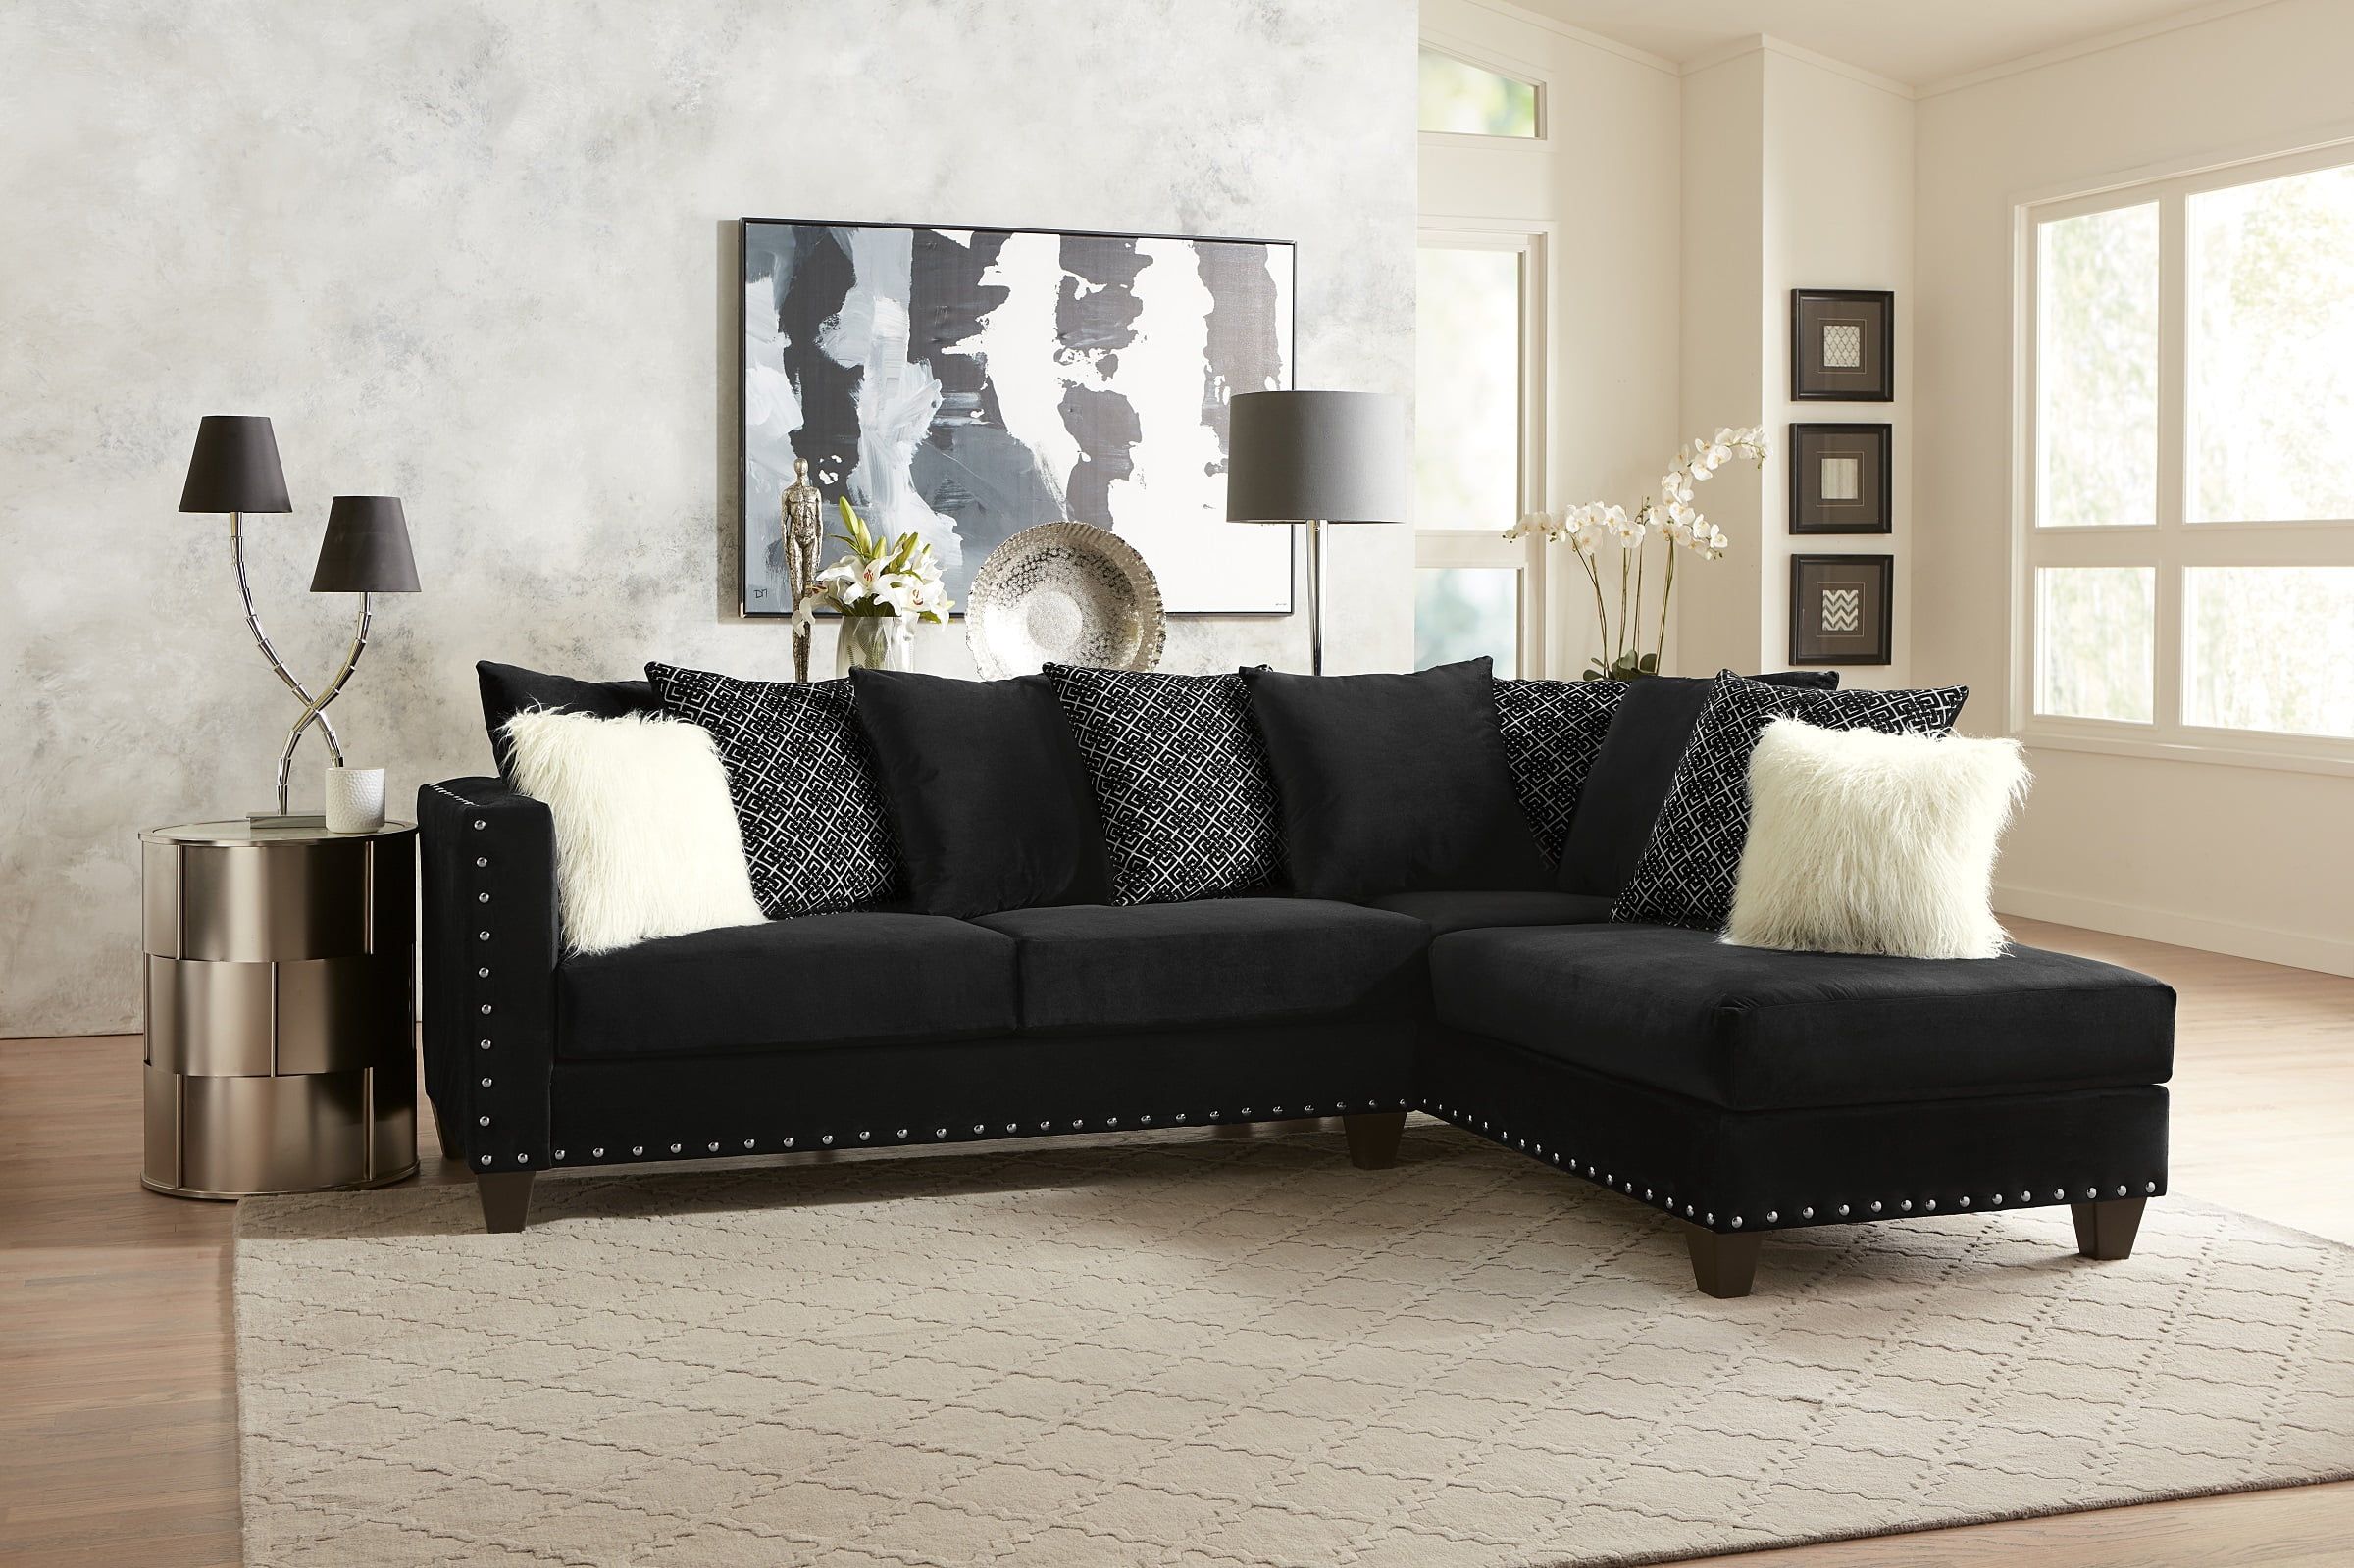 Living Room Modern Classic Black Fabric Sectional Sofa 2pc Set Cushion Pertaining To Traditional Black Fabric Sofas (View 14 of 21)